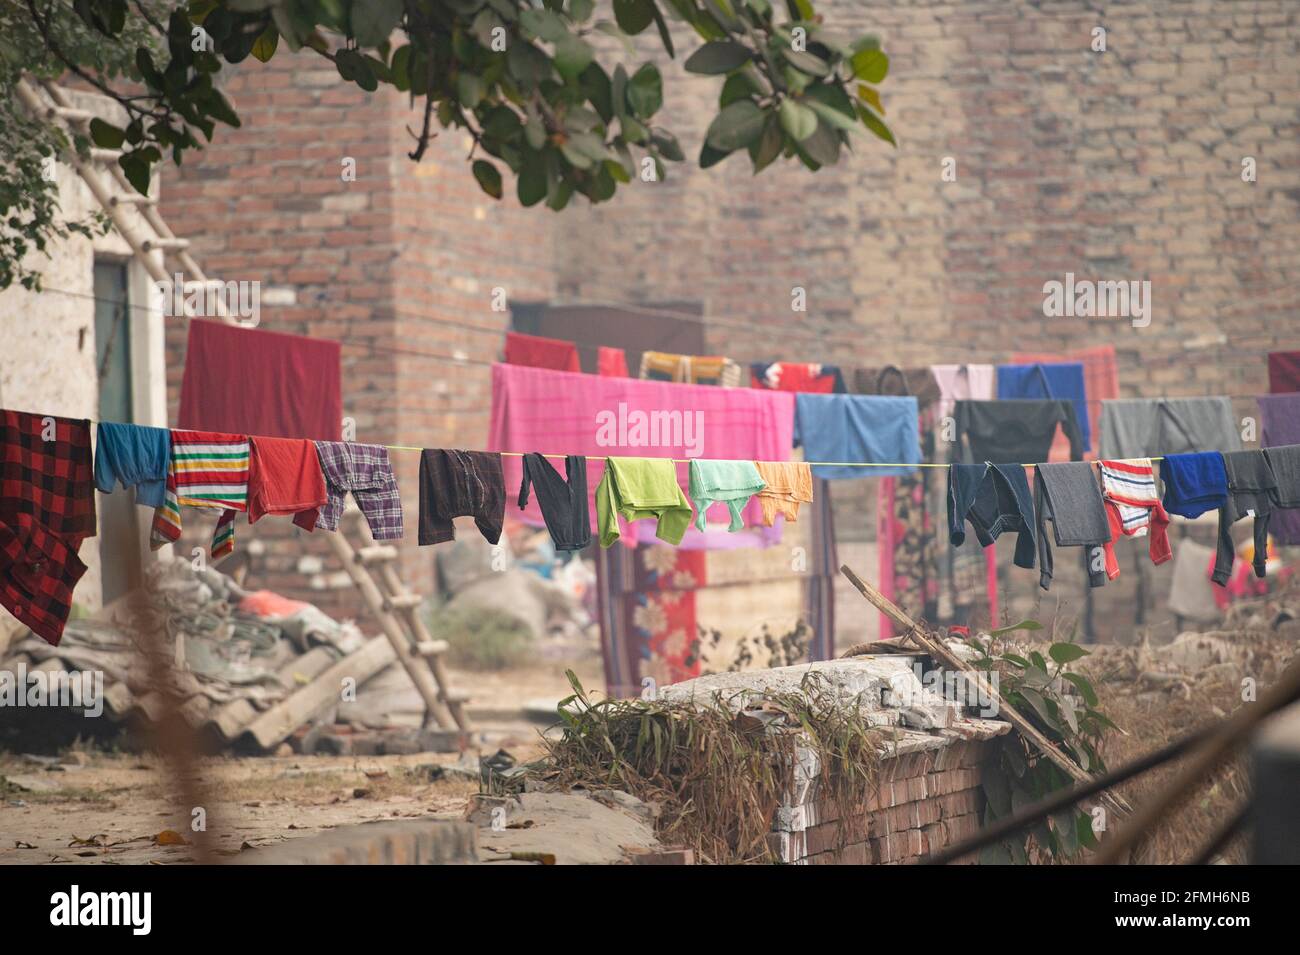 (Selective focus) Some washed colorful clothes are hanging on a clothes line or washing line on the rooftop of a building in New Delhi, India. Stock Photo